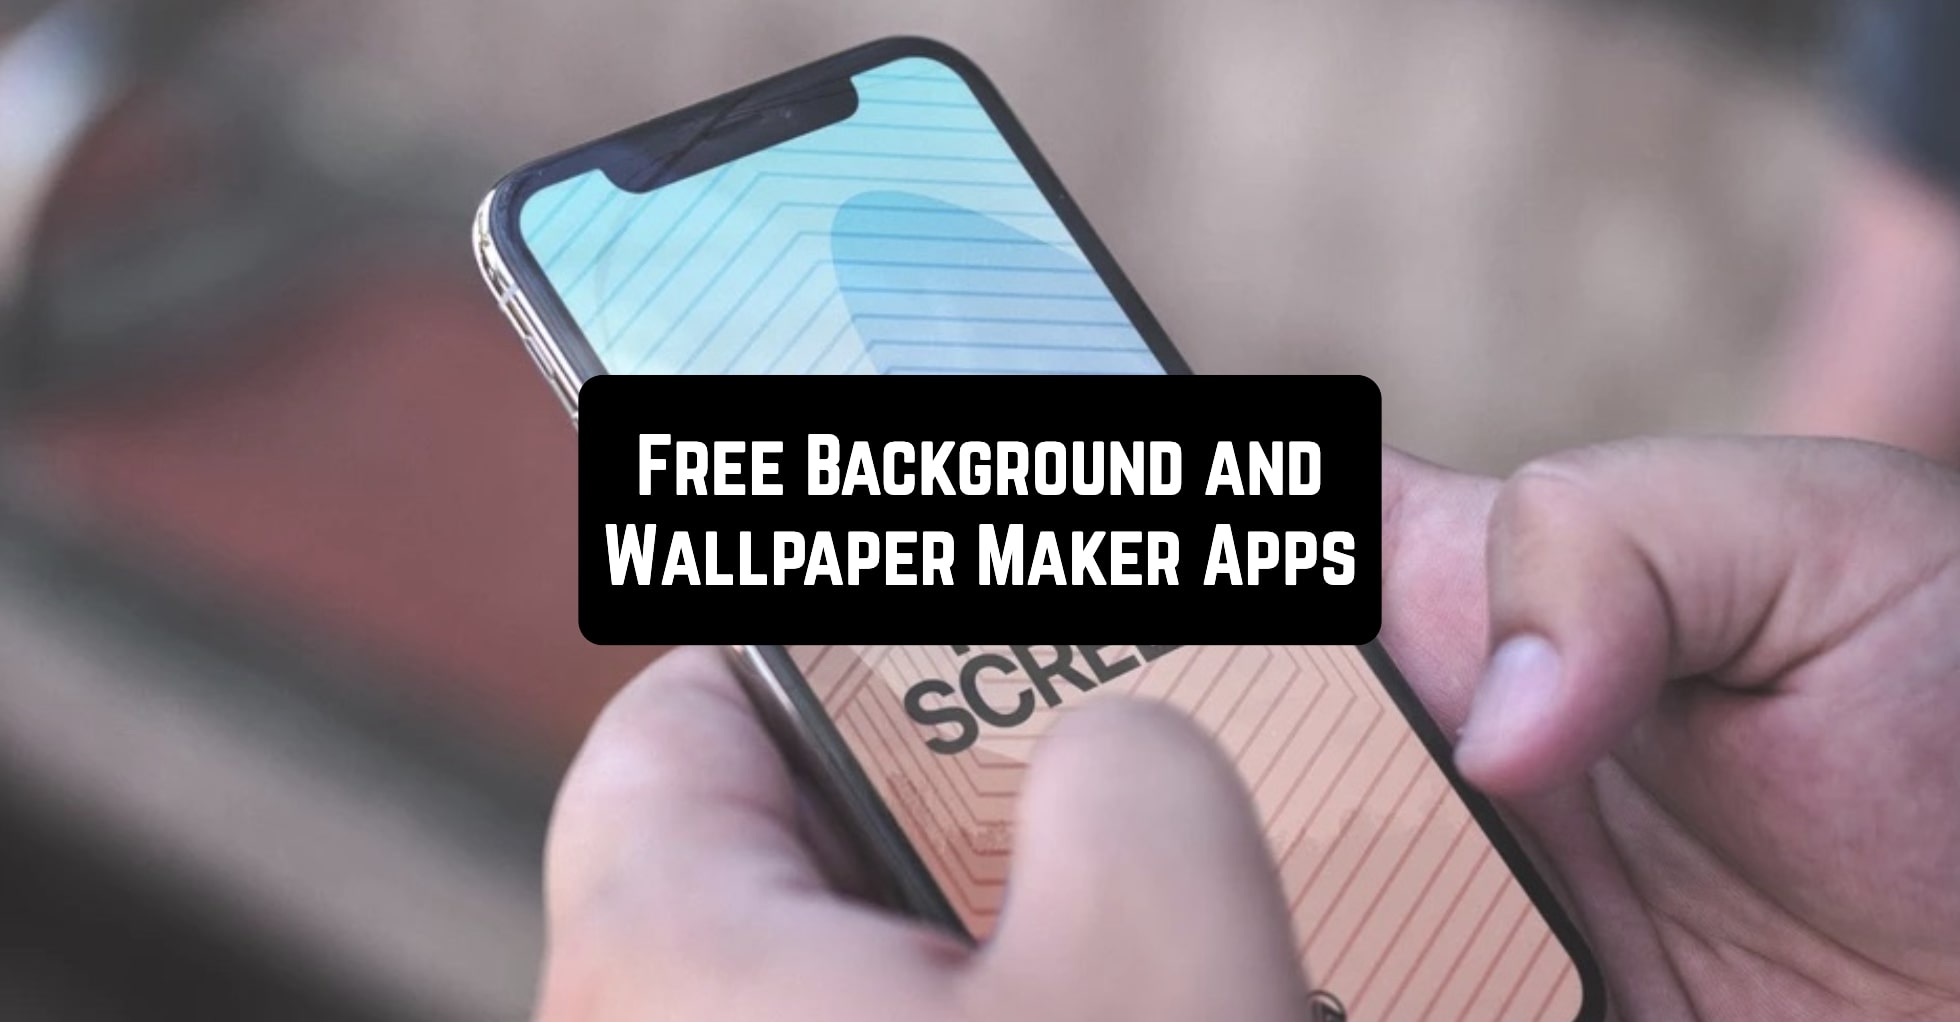 15 Free Background and Wallpaper Maker Apps (Android & iOS) | Free apps for  Android and iOS